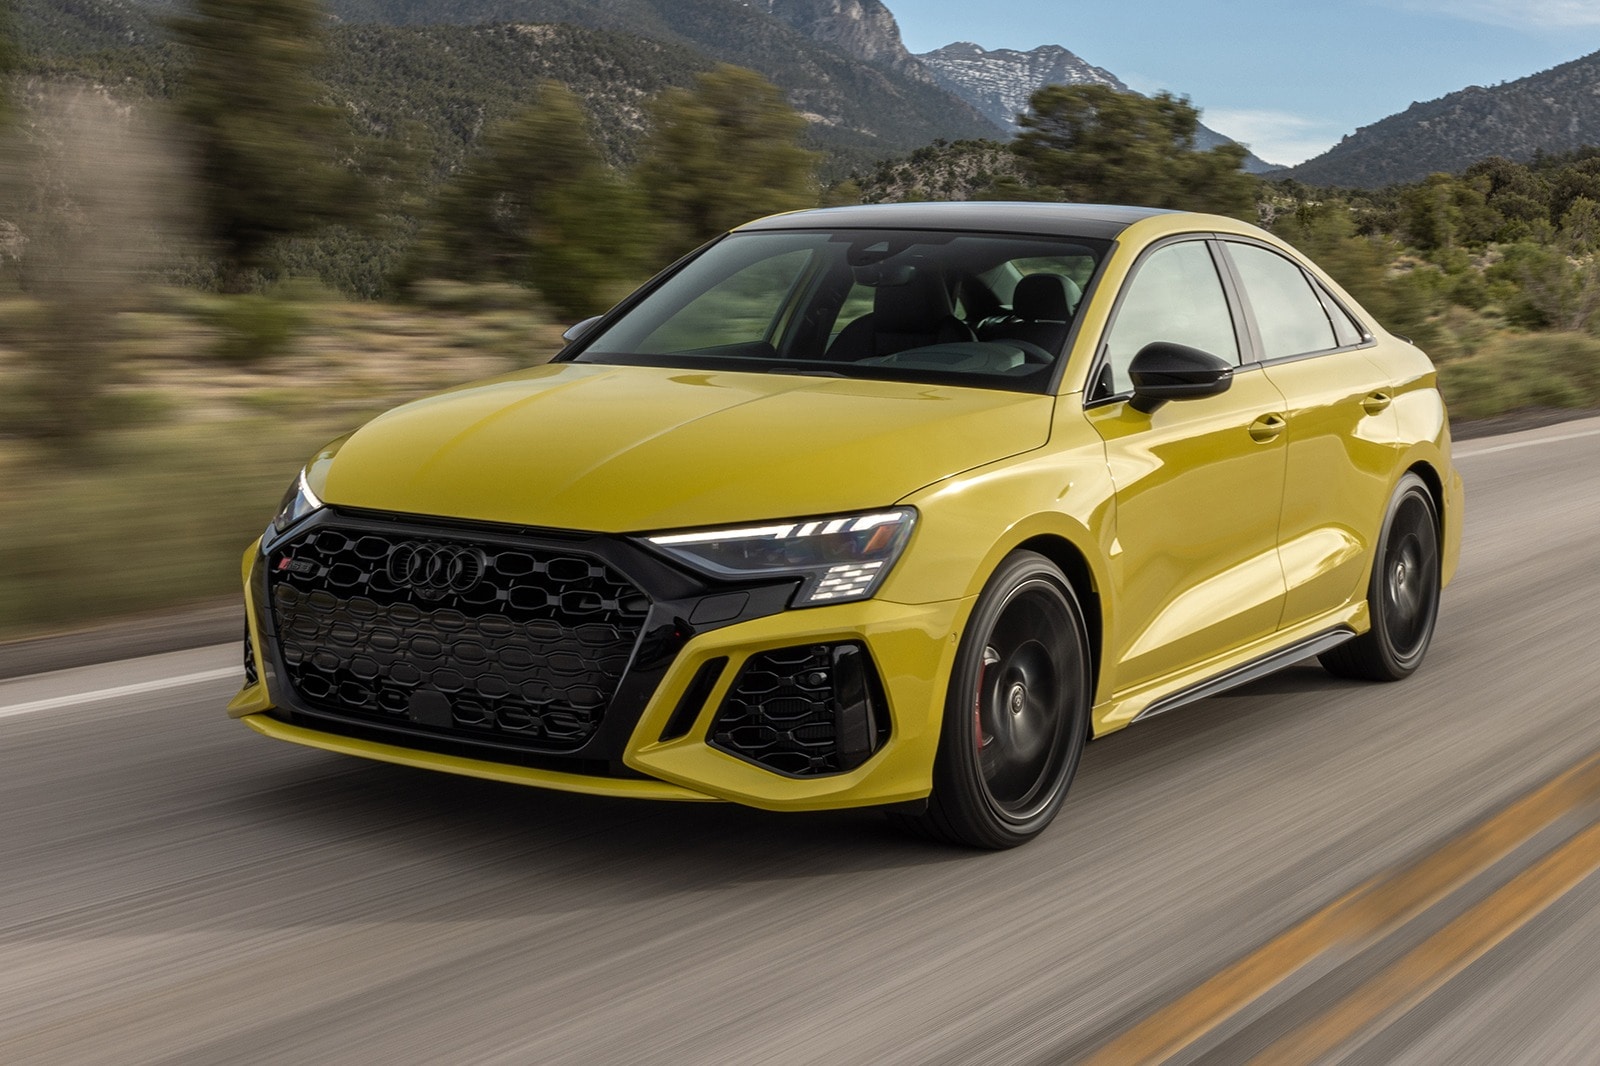 The new Audi RS 3: unmatched sportiness suitable for everyday use